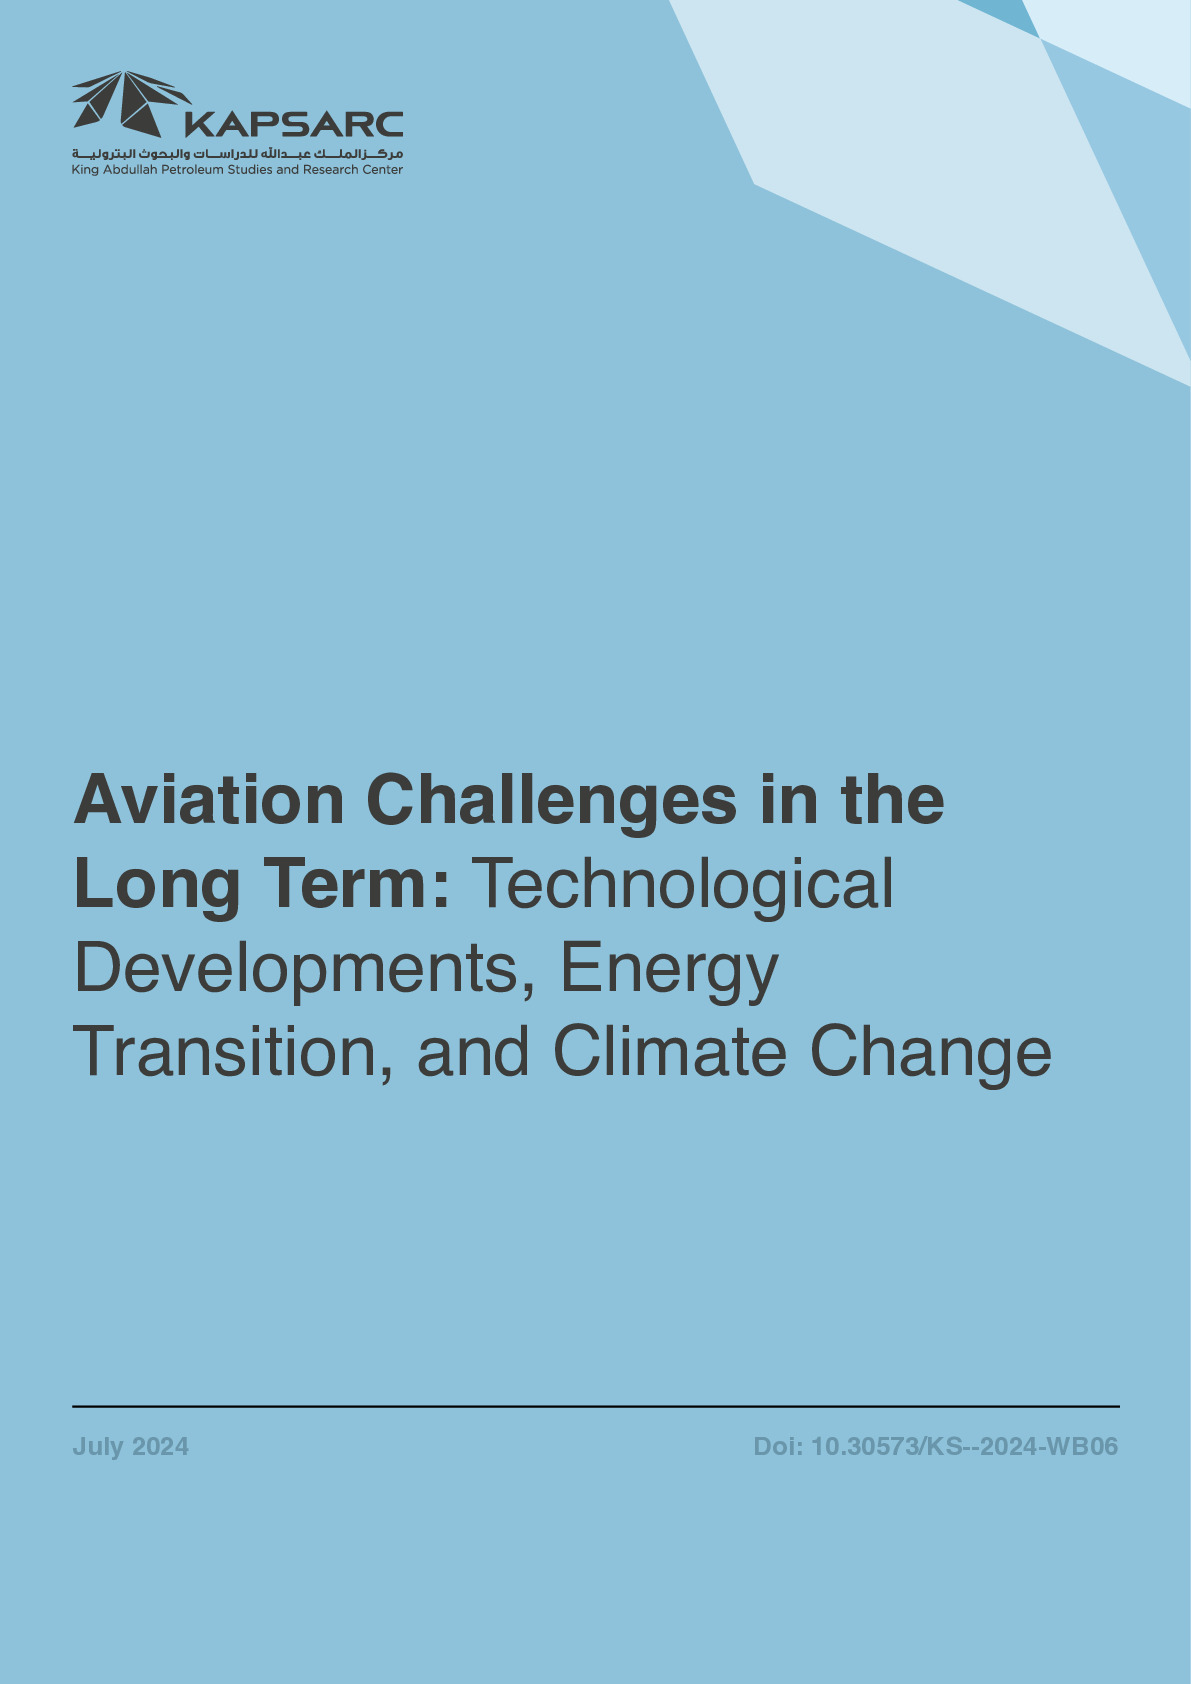 Aviation Challenges in the Long Term: Technological Developments, Energy Transition, and Climate Change